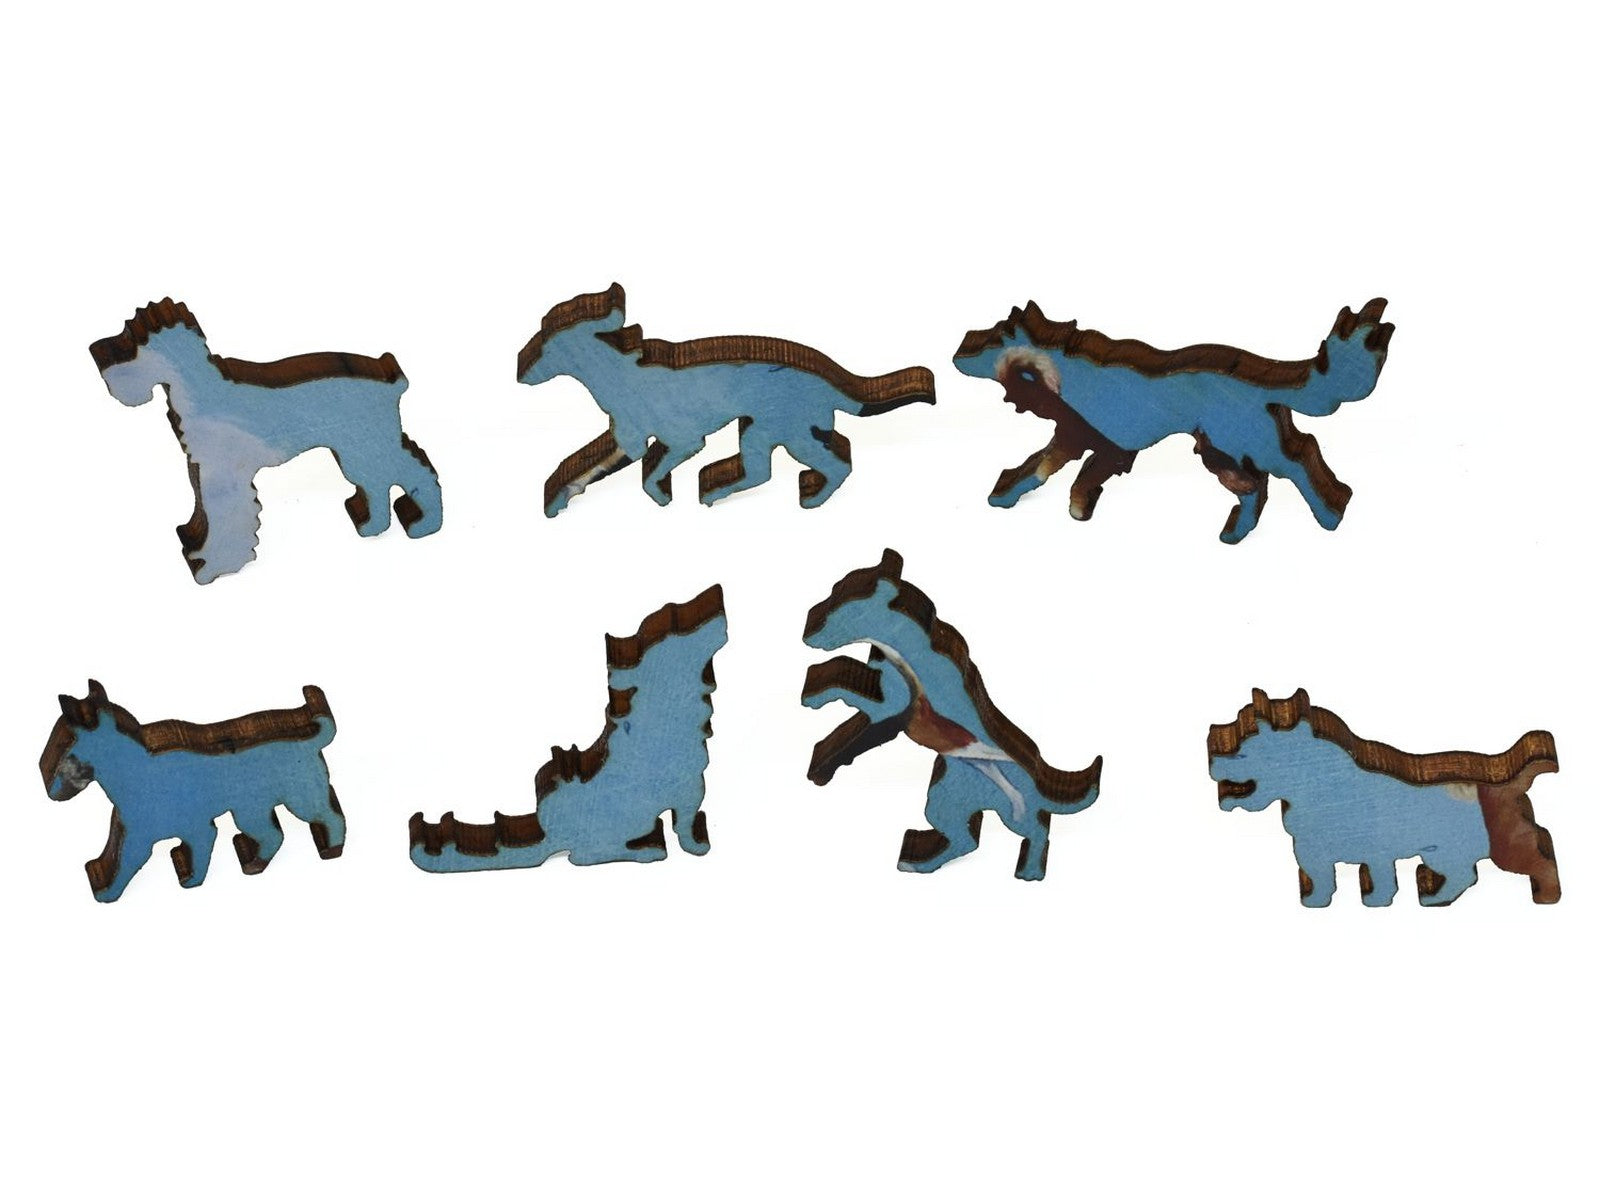 A closeup of pieces showing a group of dogs.